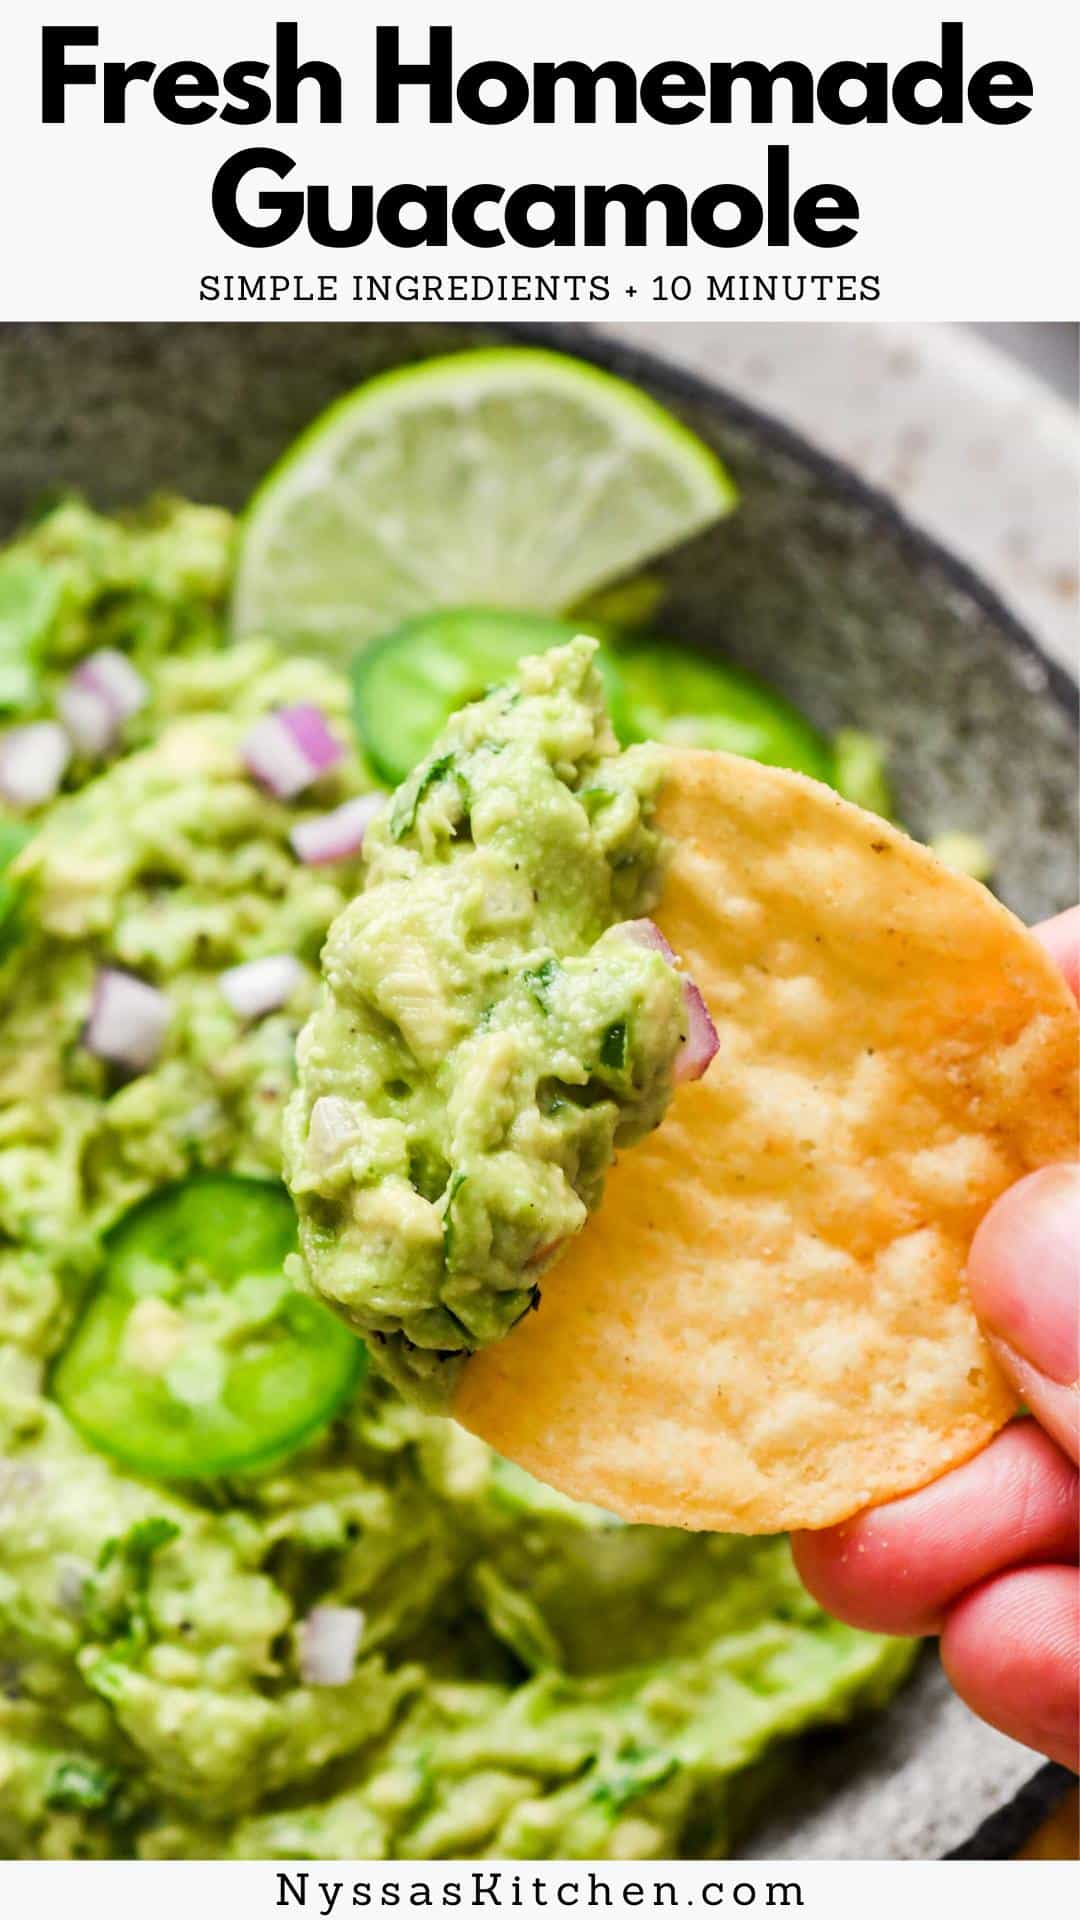 You're going to love this easy guacamole recipe! Made from scratch with fresh and flavorful ingredients including perfectly ripe avocado, cilantro, red onion, jalapeño, and lime juice. It is zesty, SO delish, and ready in less than 10 minutes.